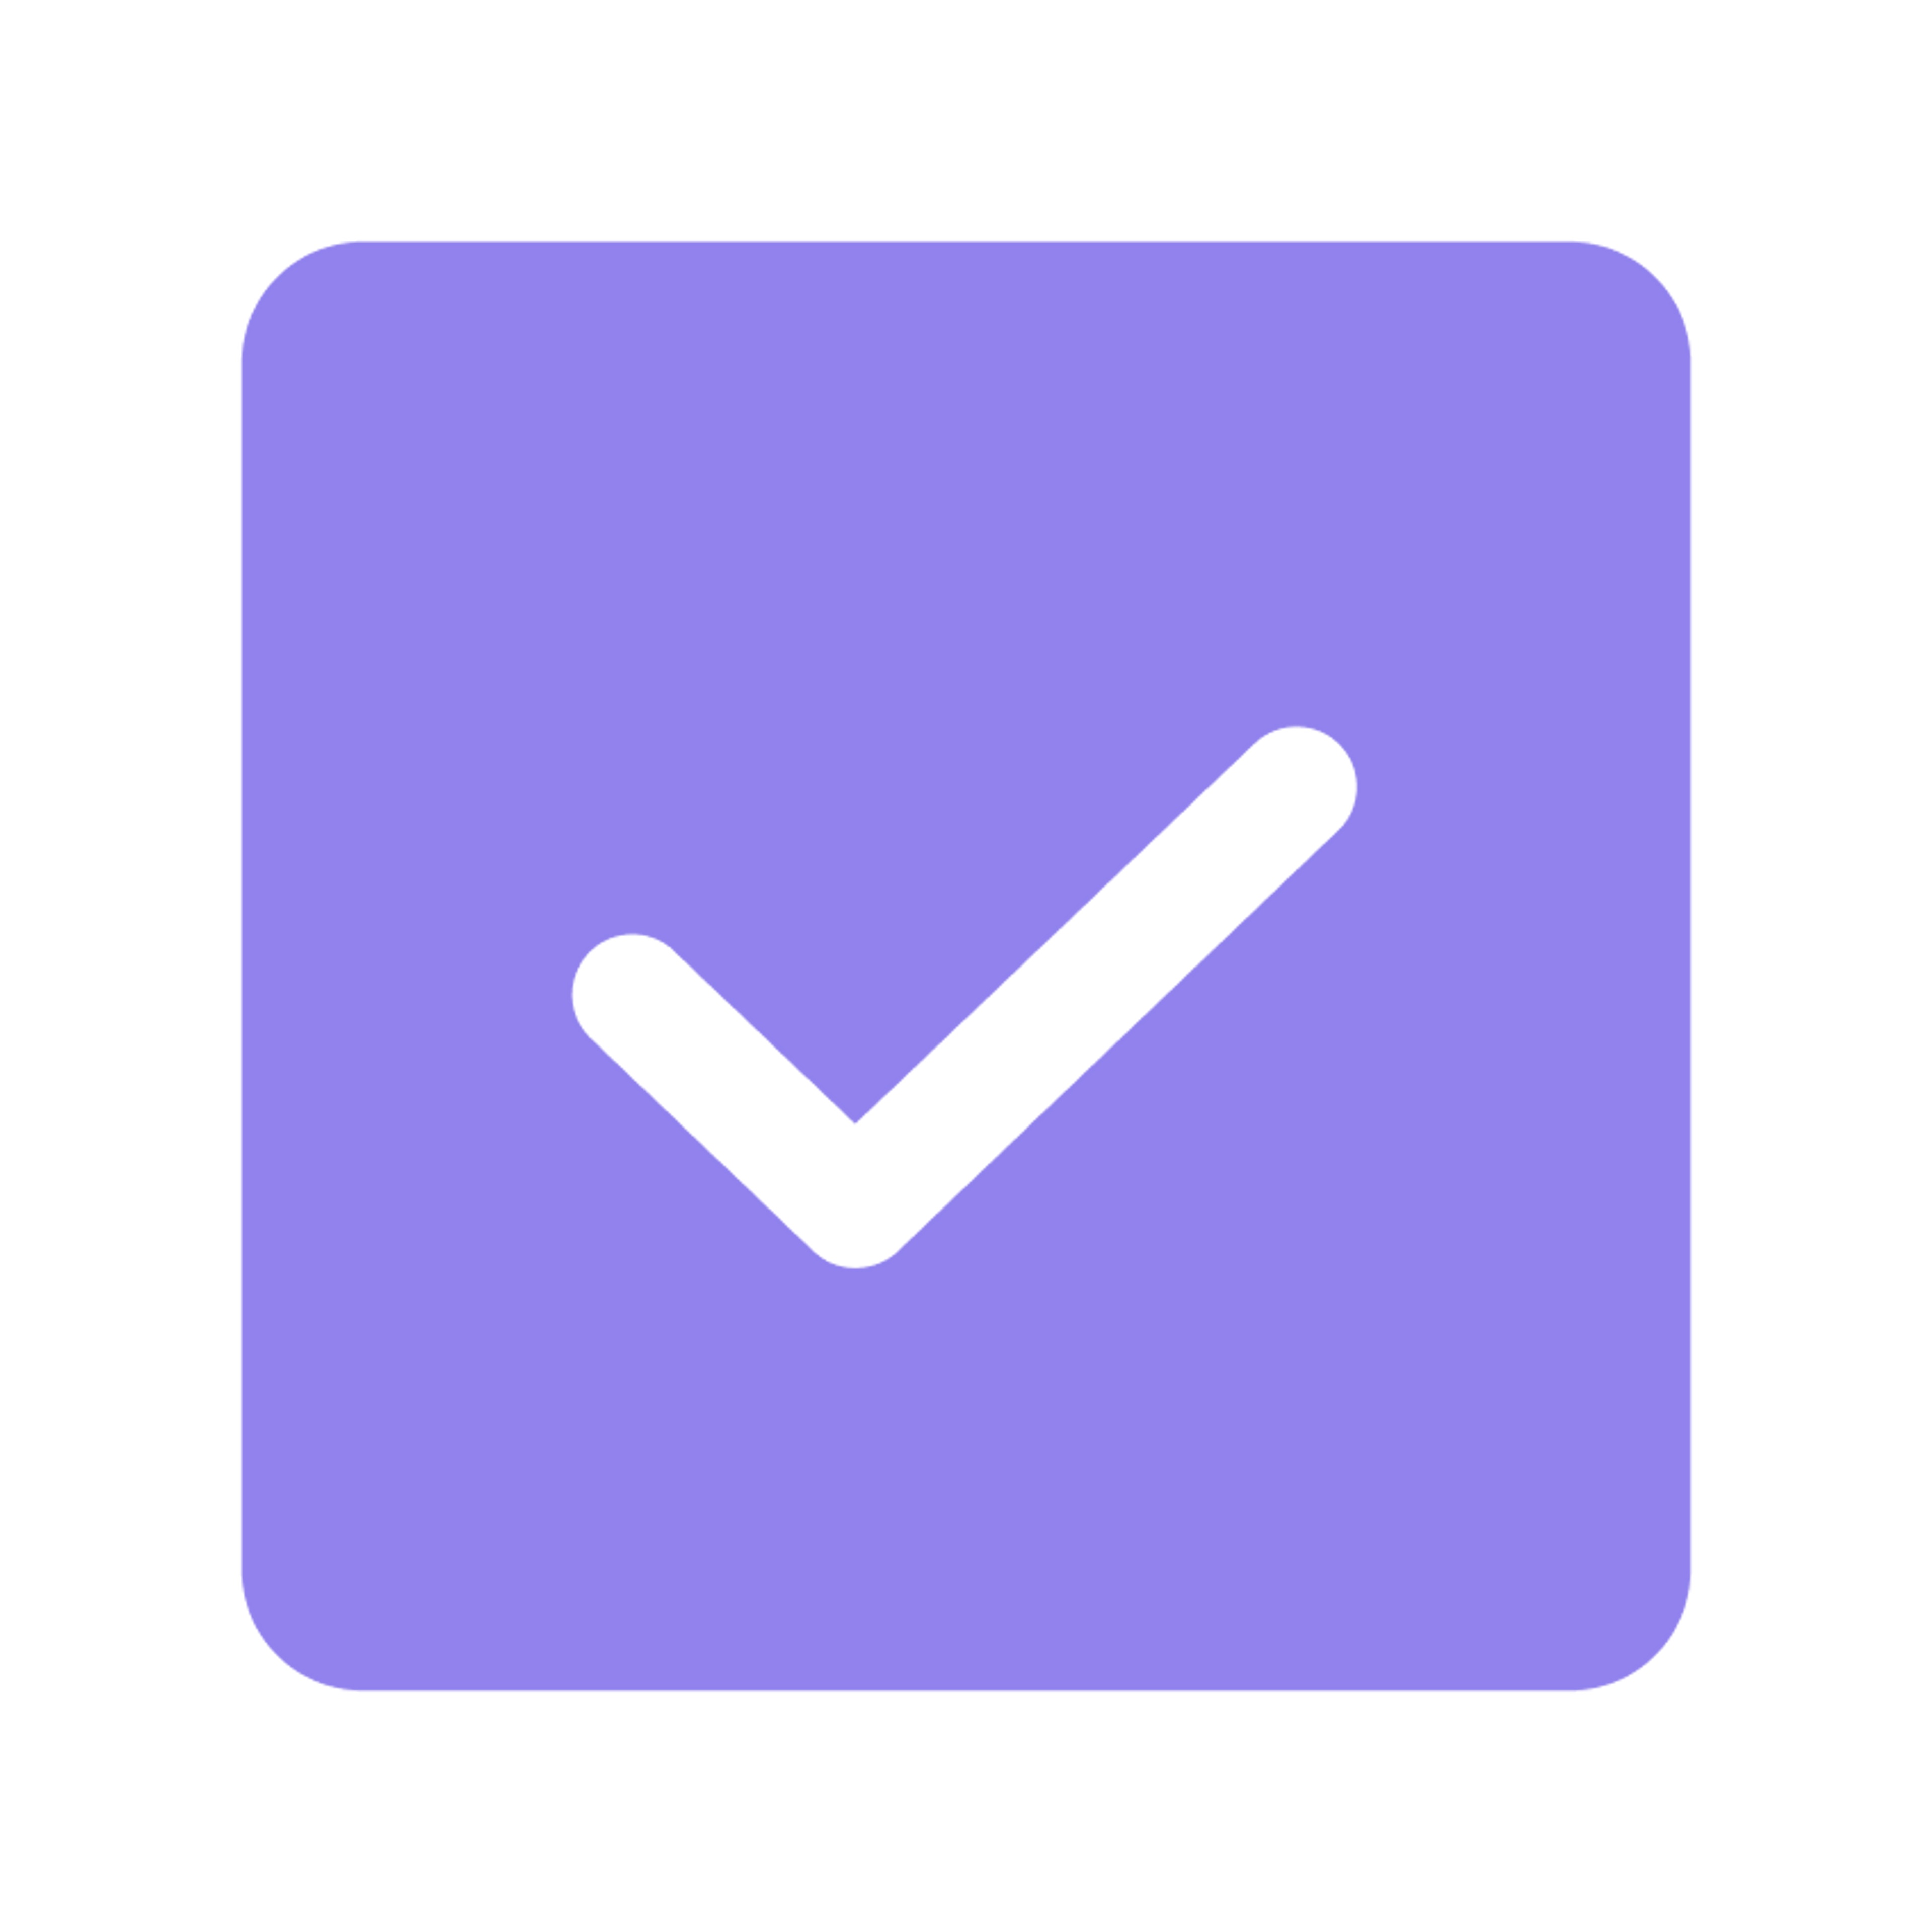 A purple icon of a checkmark on a transparent background